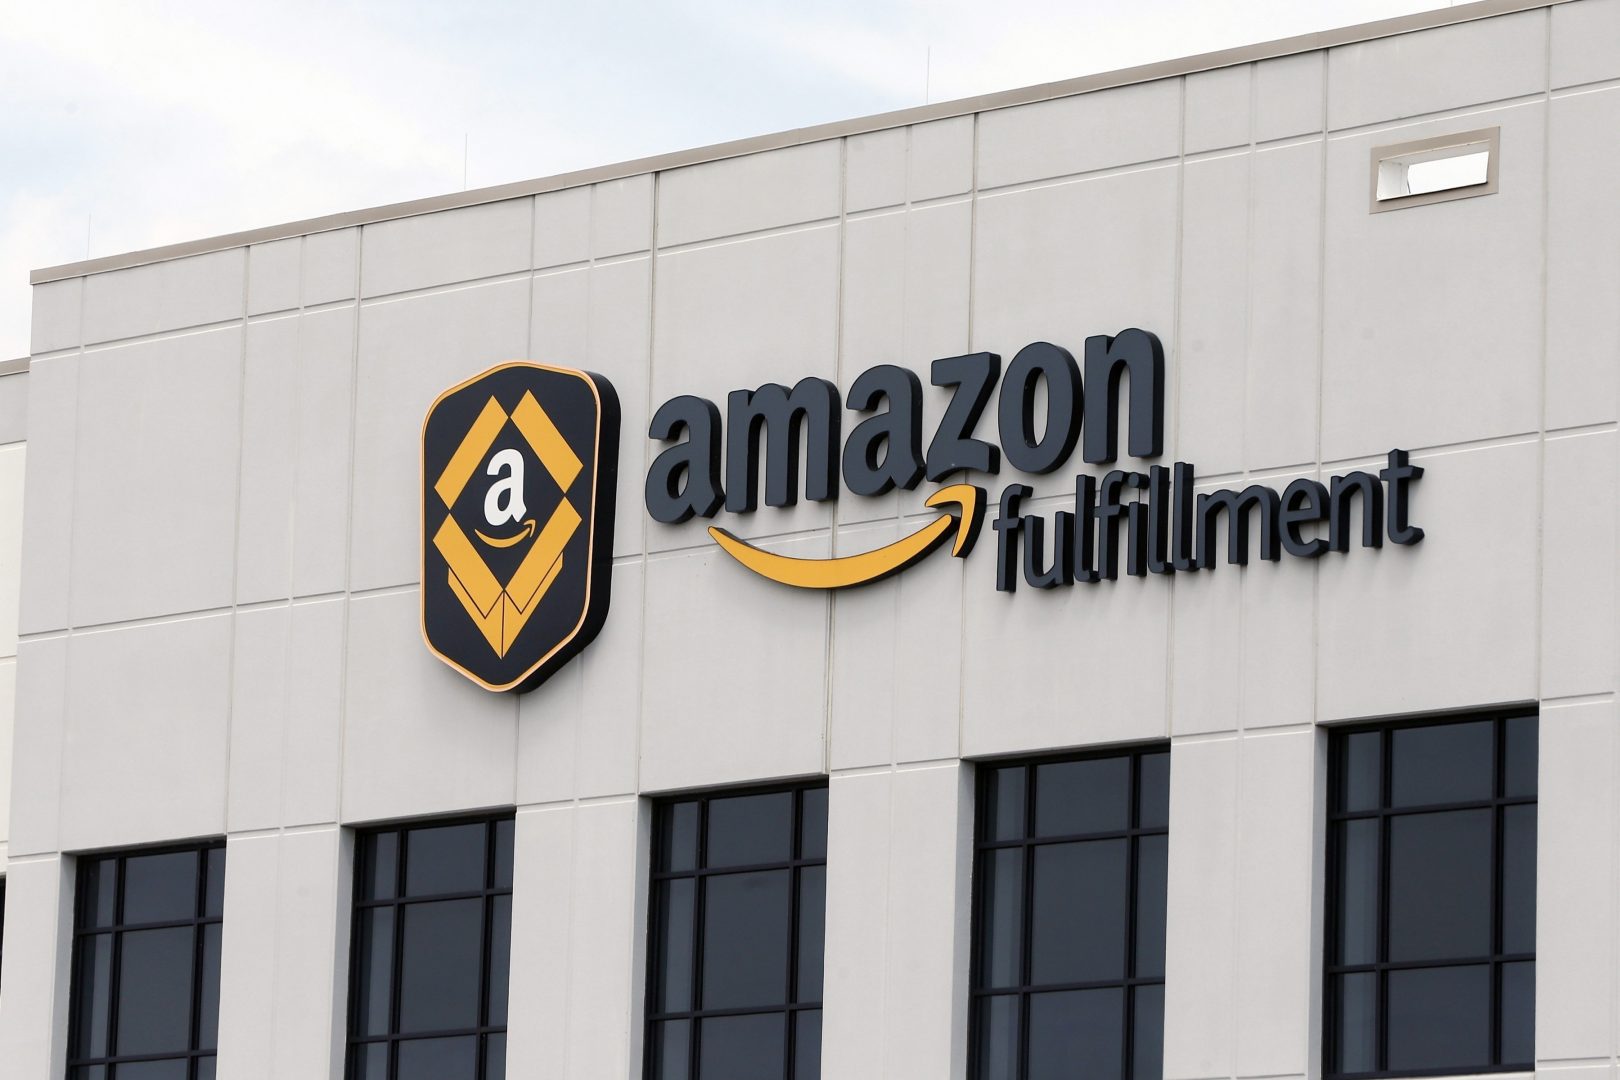 FILE - This Monday, July 8, 2019 file photo shows the Amazon Fulfillment warehouse in Shakopee, Minn. Amazon is on the hunt for workers. The online shopping giant is looking to fill more than 30,000 vacant jobs by early next year, and is holding job fairs across the country next week to find candidates. The job fairs will take place Sept. 17, 2019 in six U.S. cities: Arlington, Virginia; Boston; Chicago; Dallas, Texas; Nashville, Tennessee; and Seattle. 